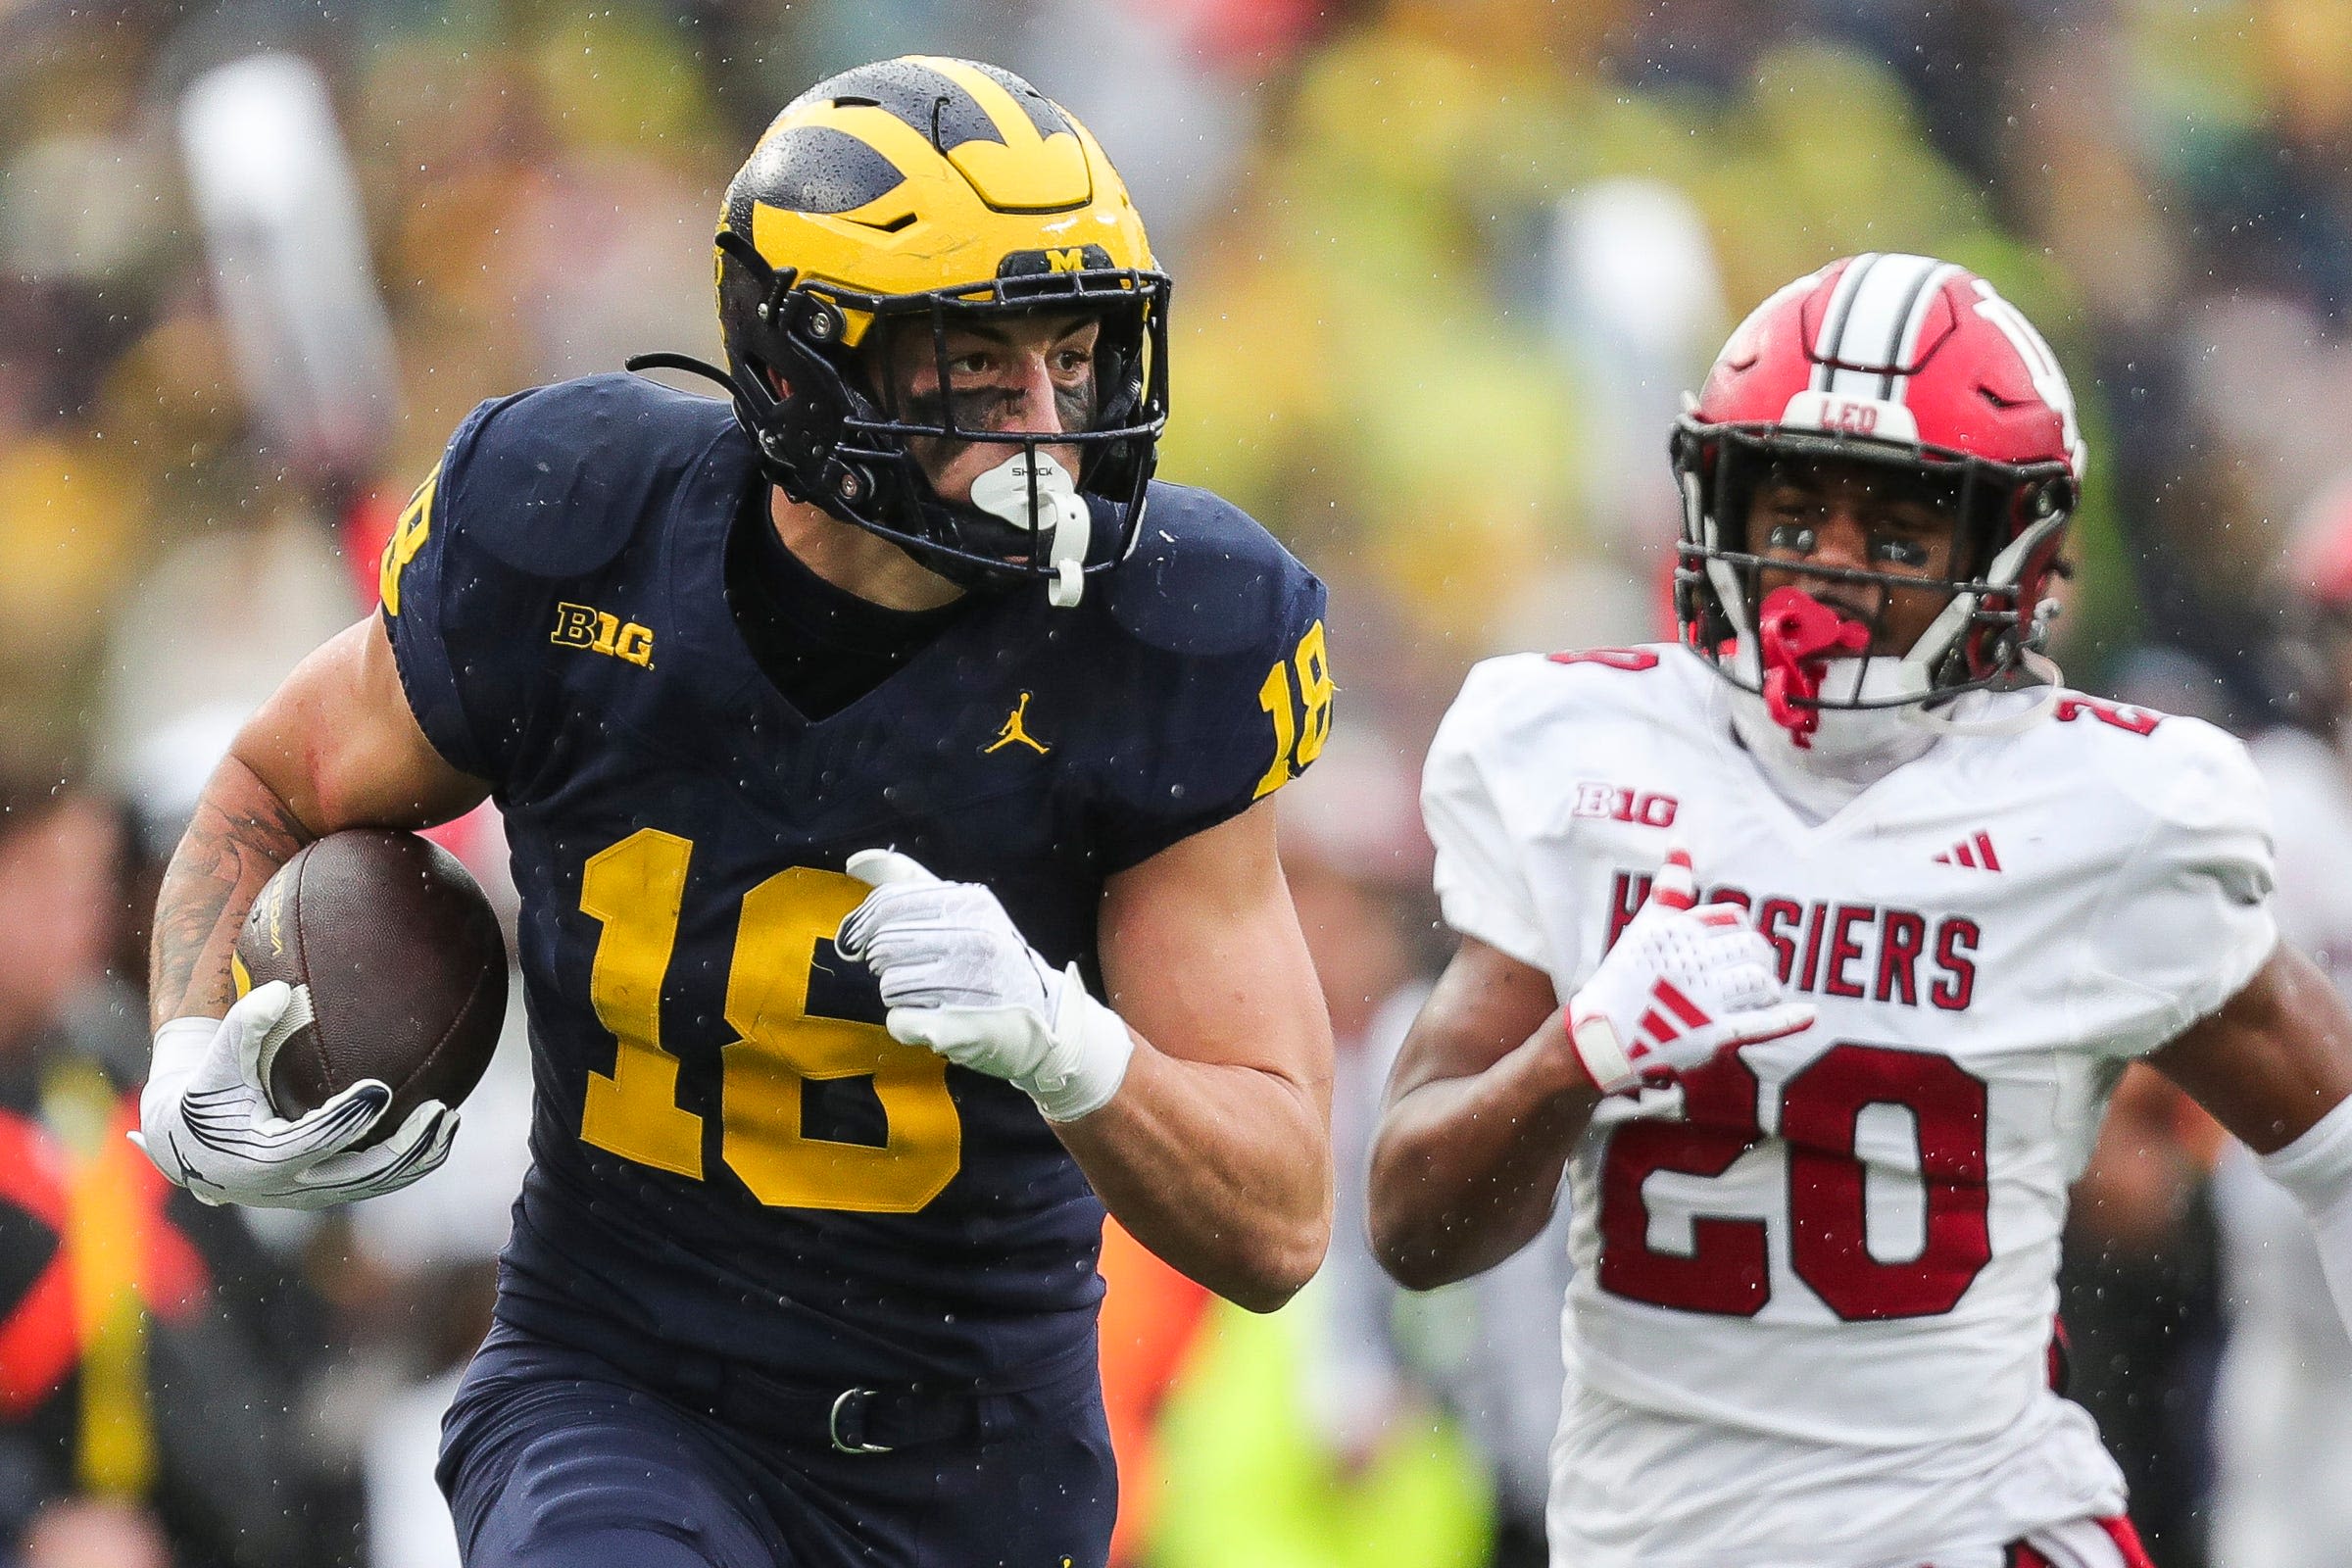 Last year, I picked Michigan football to win it all. This year? It won't win the Big Ten.